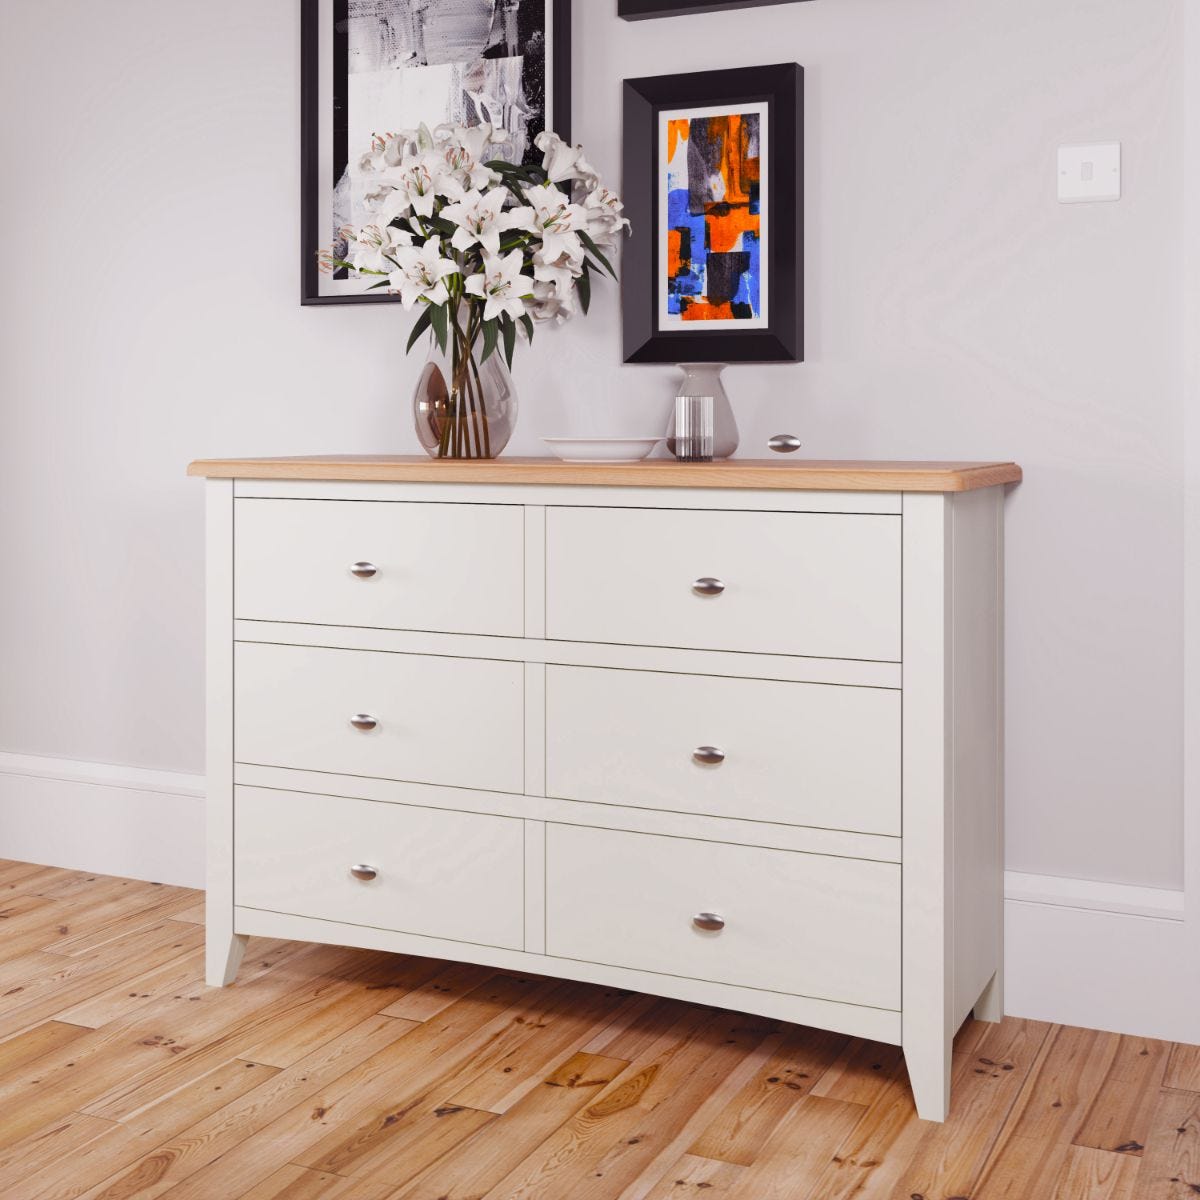 Kettle Interiors Two Tone Oak & White 6 Drawer Chest of Drawers